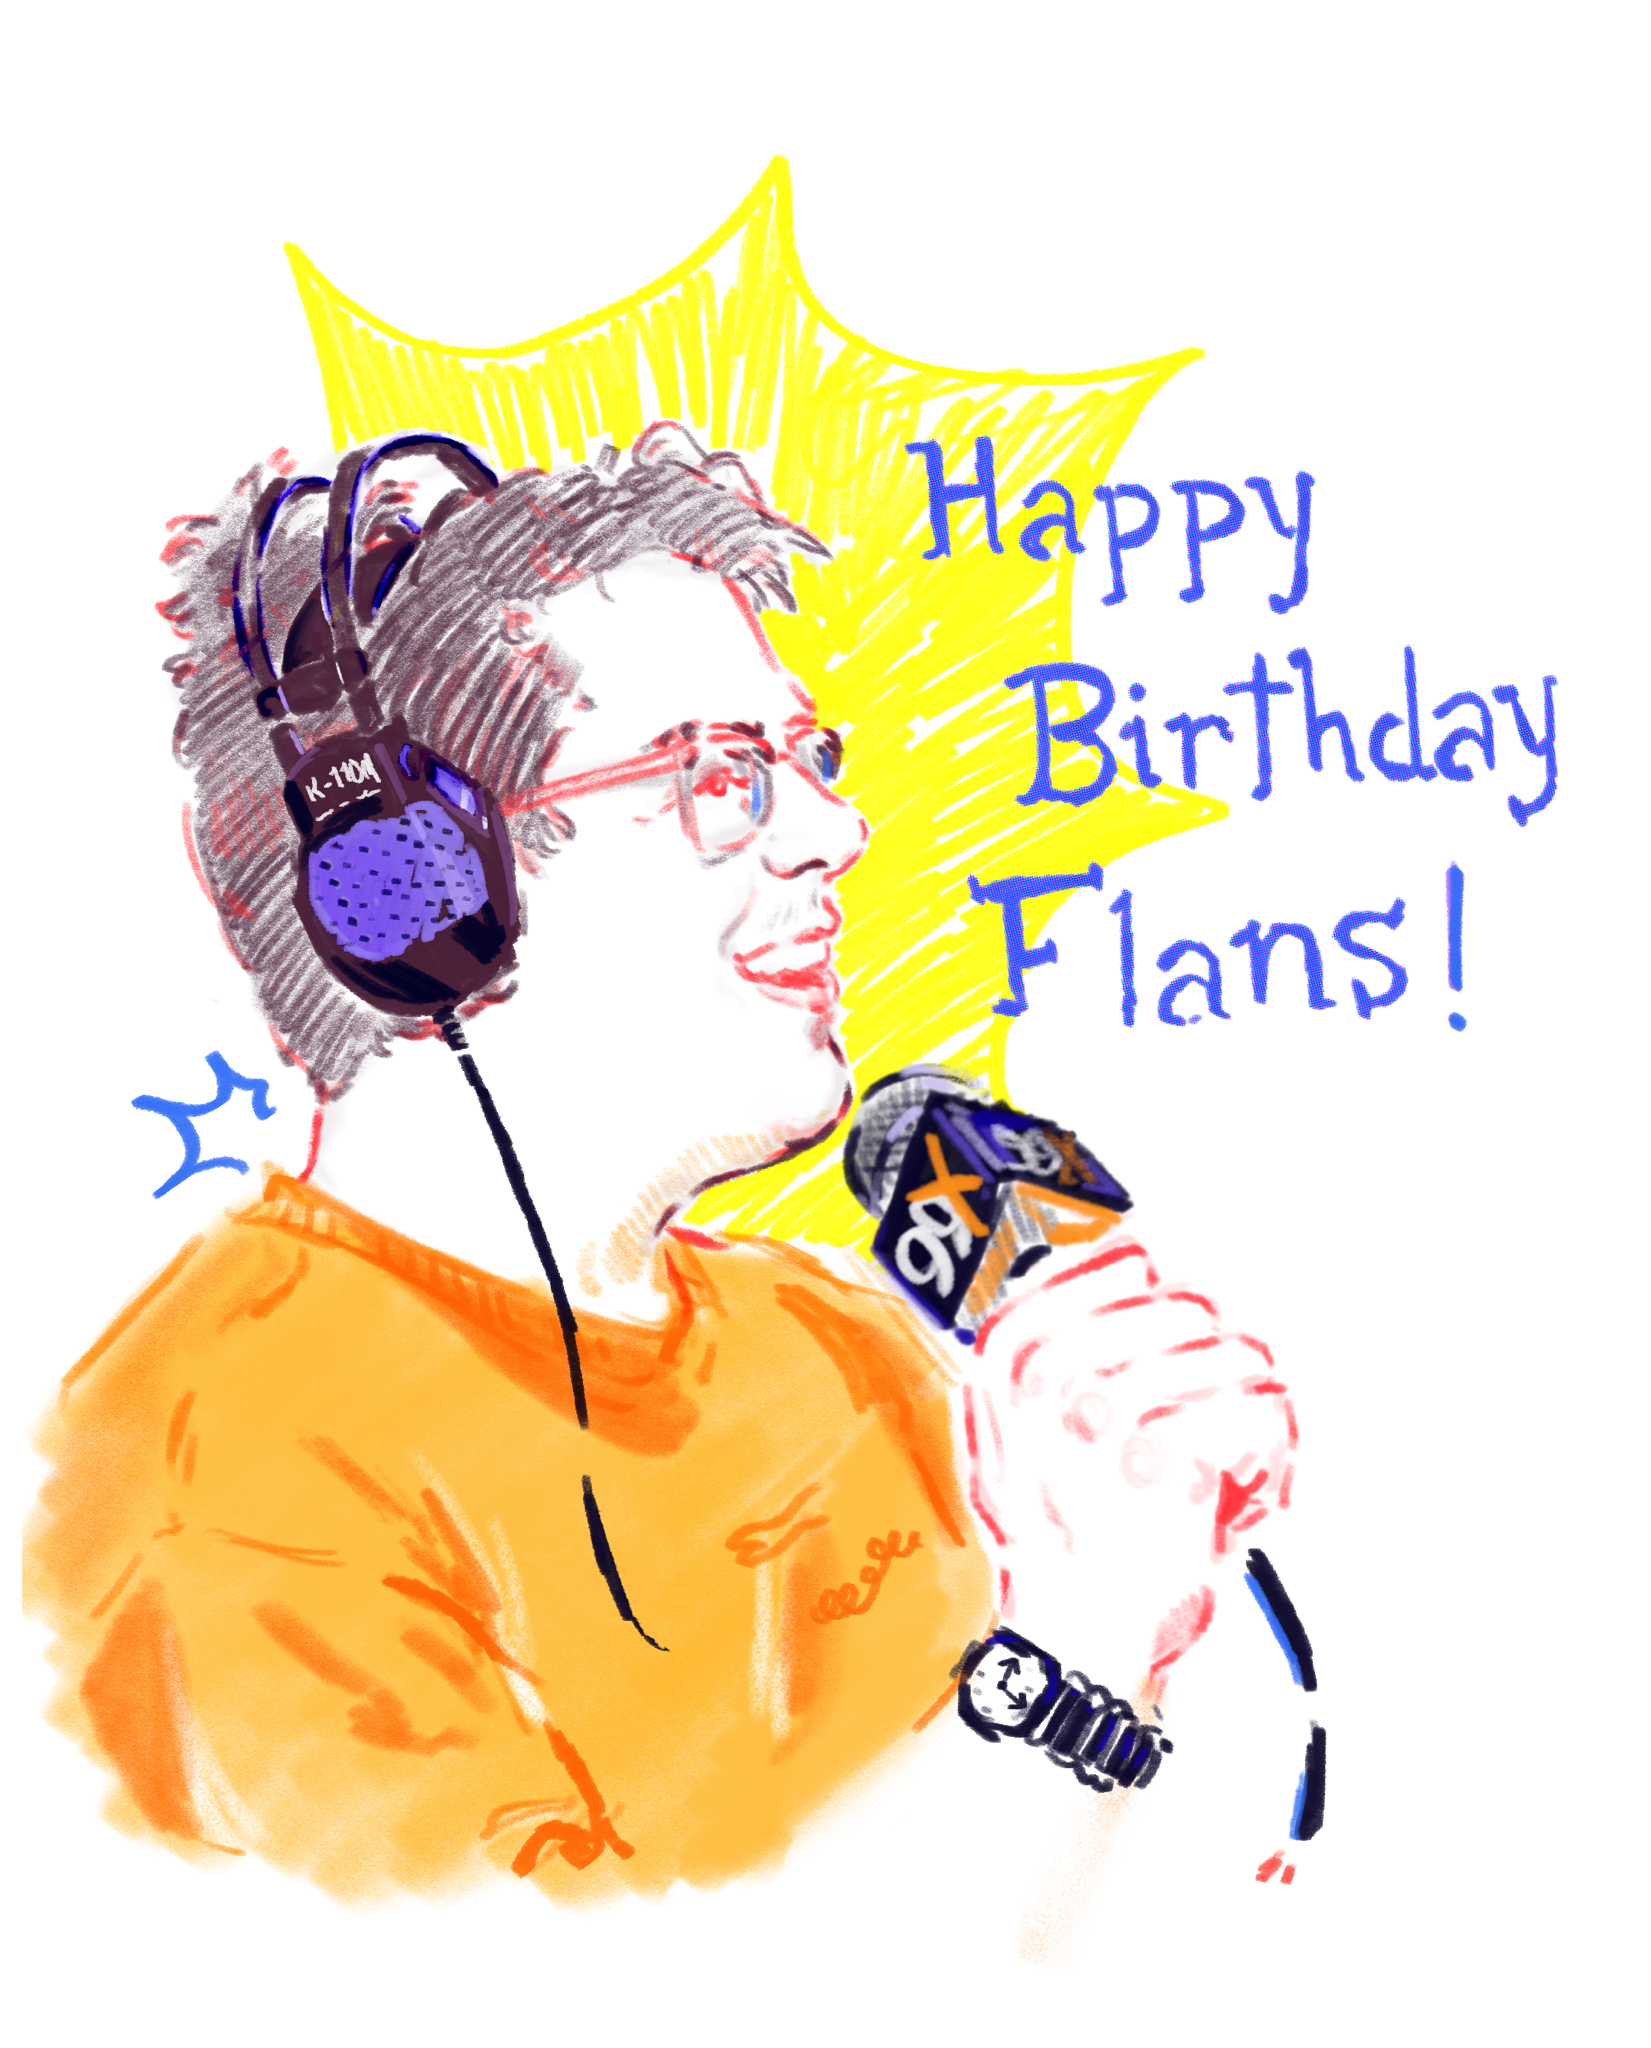 side portrait of John Flansburgh from the band They Might be Giants, looking to your right. John is wearing an orange shirt, pair of purple headphones, and holding a radio mic. There is a yellow sparkle behind John and text that reads ‘Happy Birthday Flans!’